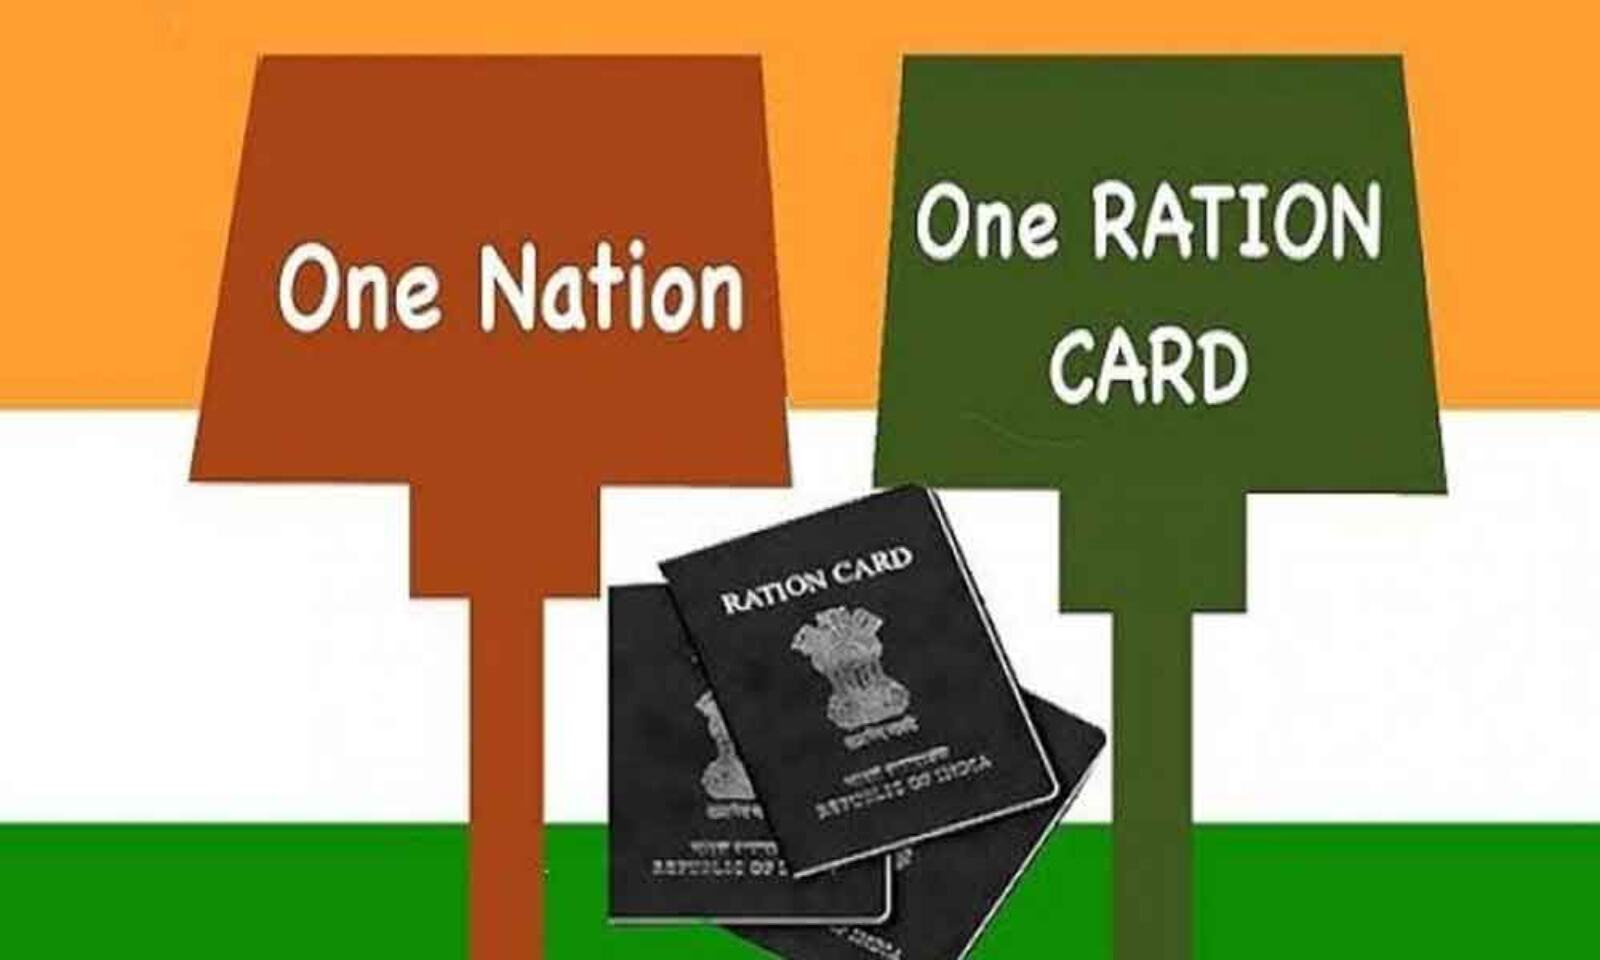 17 States Implement One Nation One Ration Card System After Uttarakhand Becomes The Latest To Complete The Reform